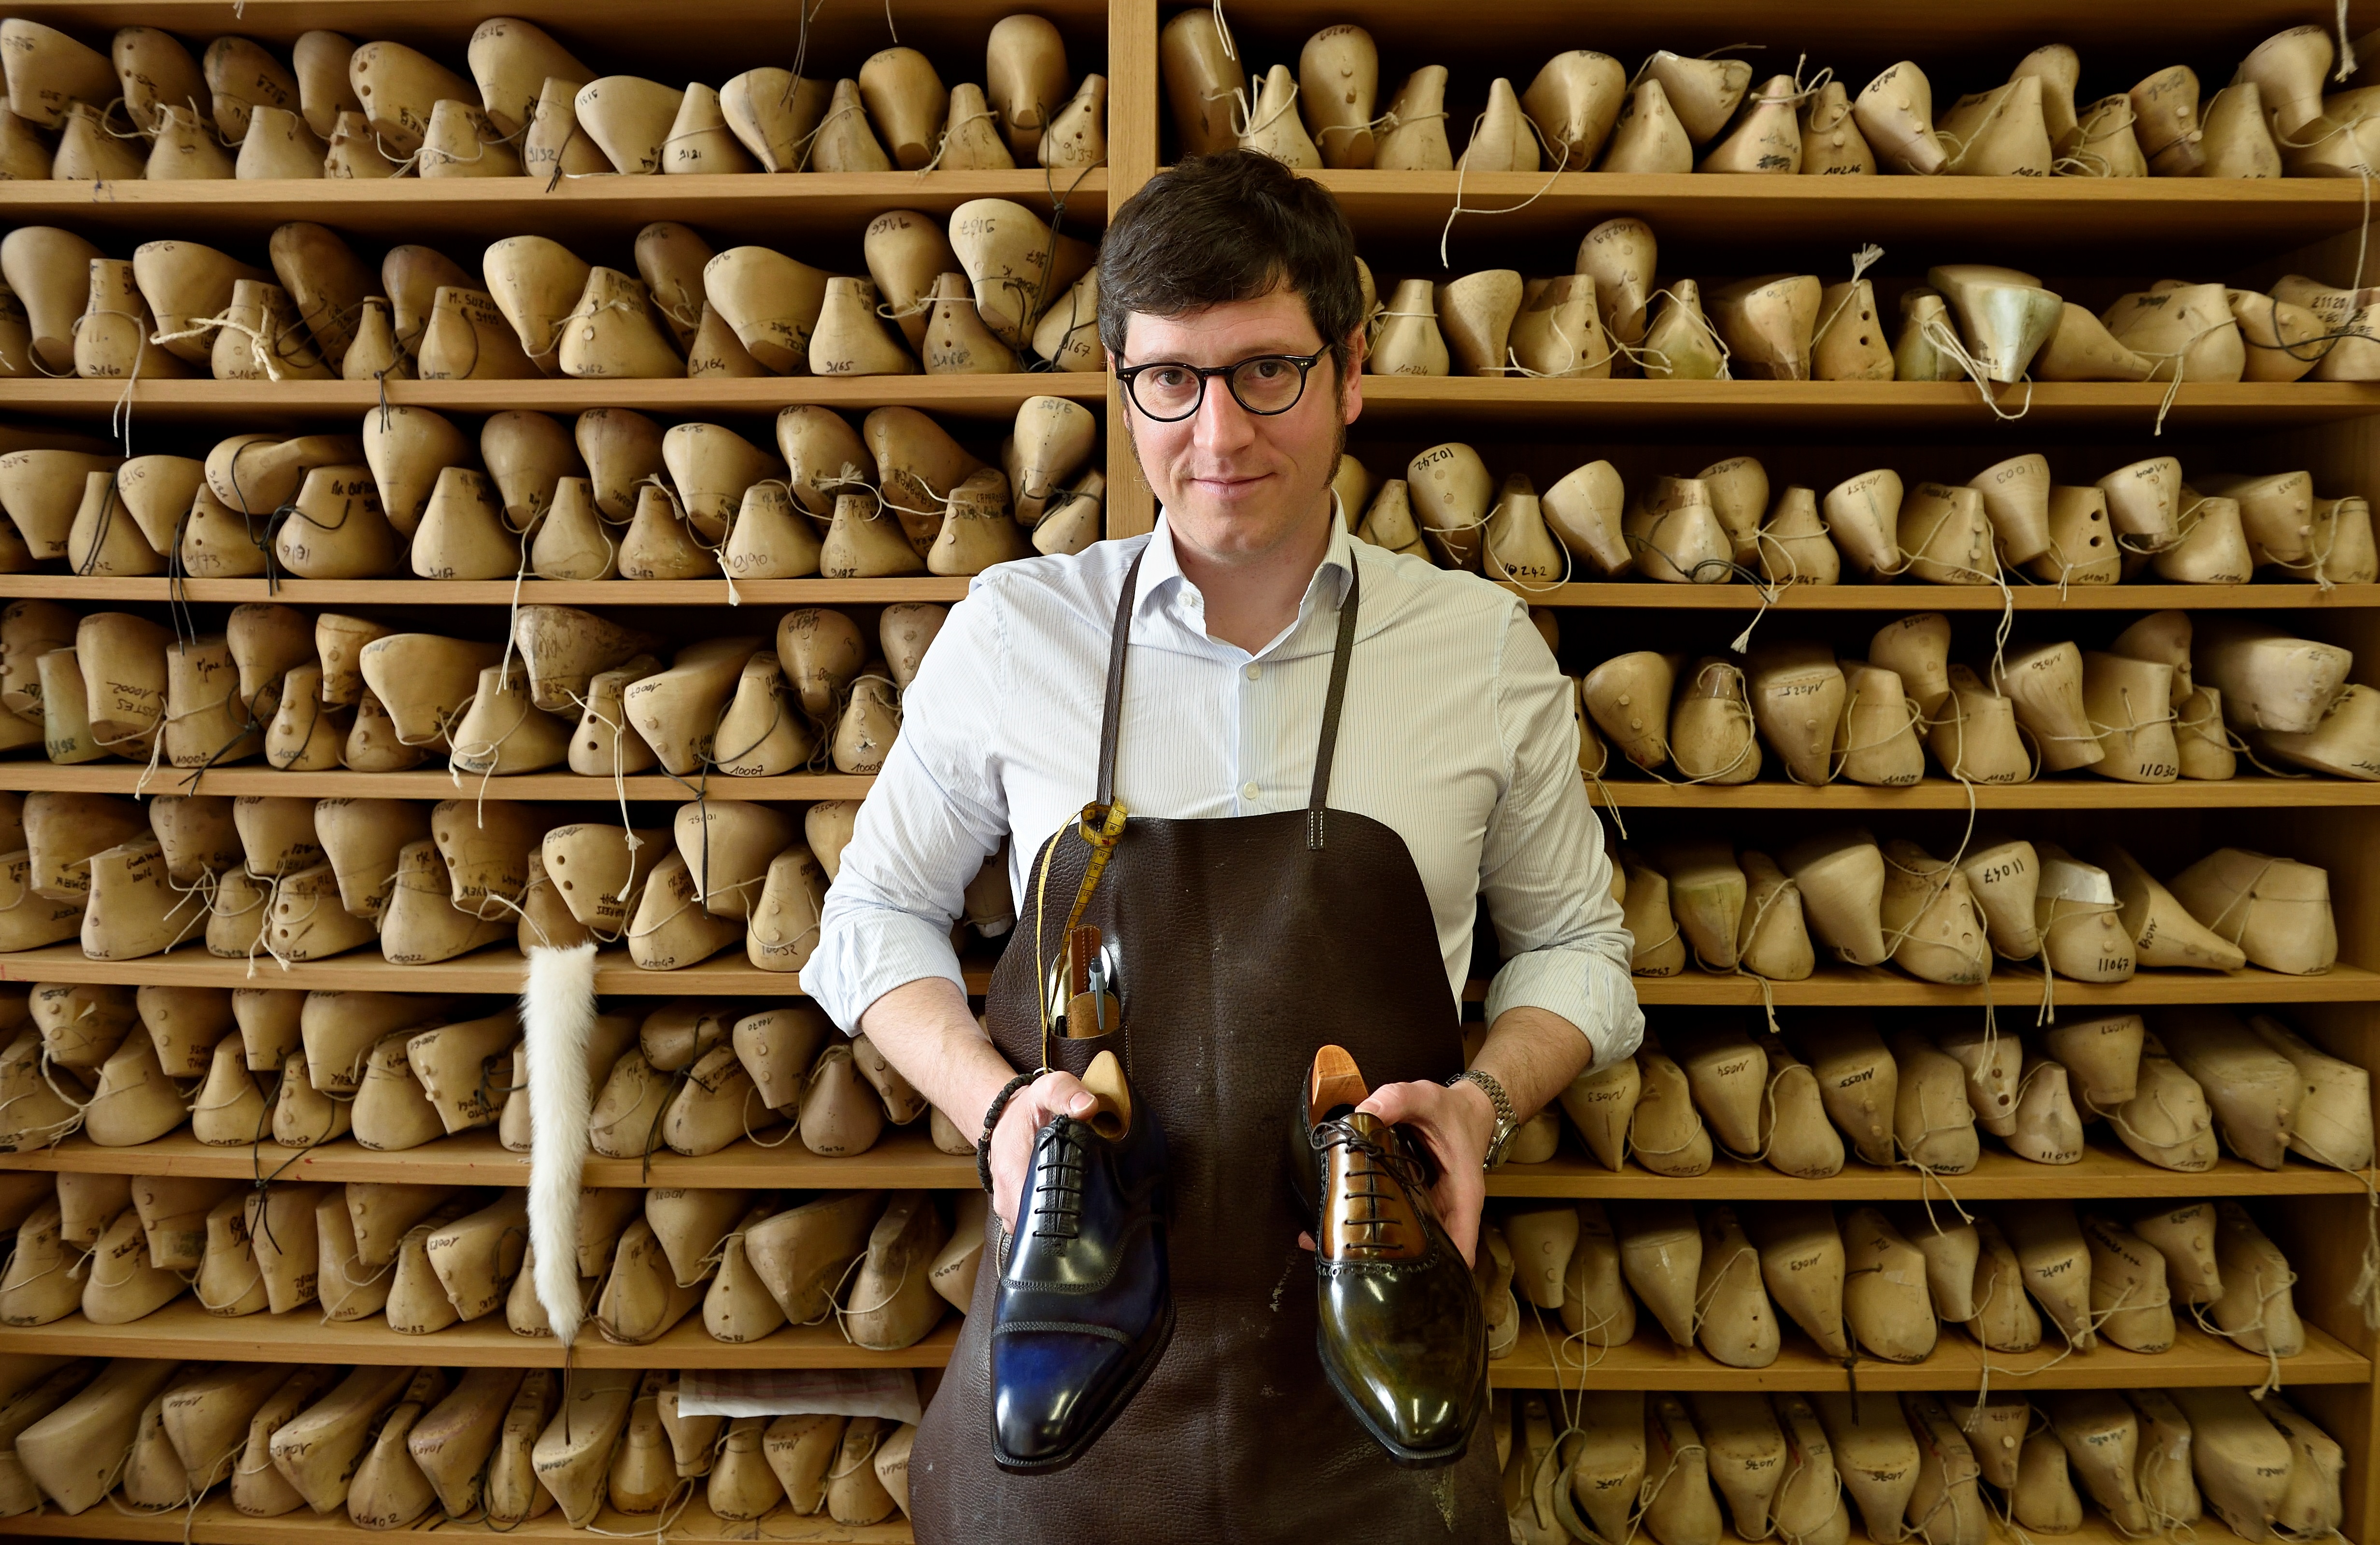 (FILES) This file photo taken on May 3, 2016 shows Berluti's master luxury shoemaker Jean-Michel Casalonga posing in the Berluti's workshop in Paris. Far from the excitement of the Paris Fashion Week, the luxury shoemaker Berluti manufactures its custom-made shoes for men in a discrete workshop off the Champs-Elysees, producing numbered and a limited amount of hundreds of pairs a year for clients all over the world . / AFP PHOTO / Eric Feferberg